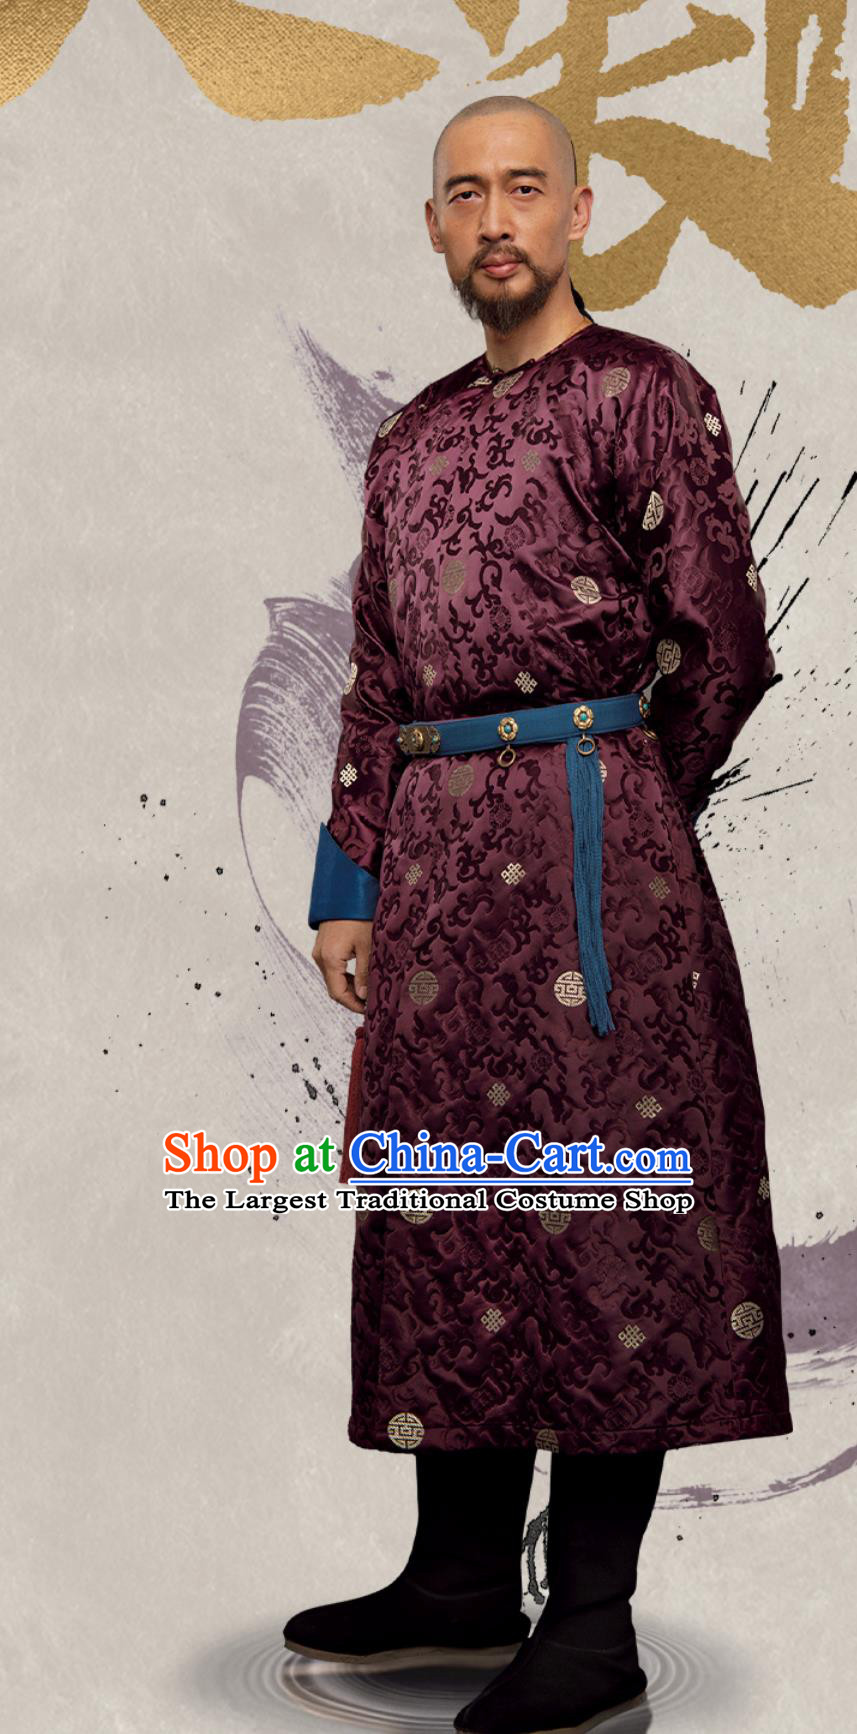 Historical Drama The Long River Important Official Nalan Mingju Garment Costumes China Ancient Qing Dynasty Male Clothing